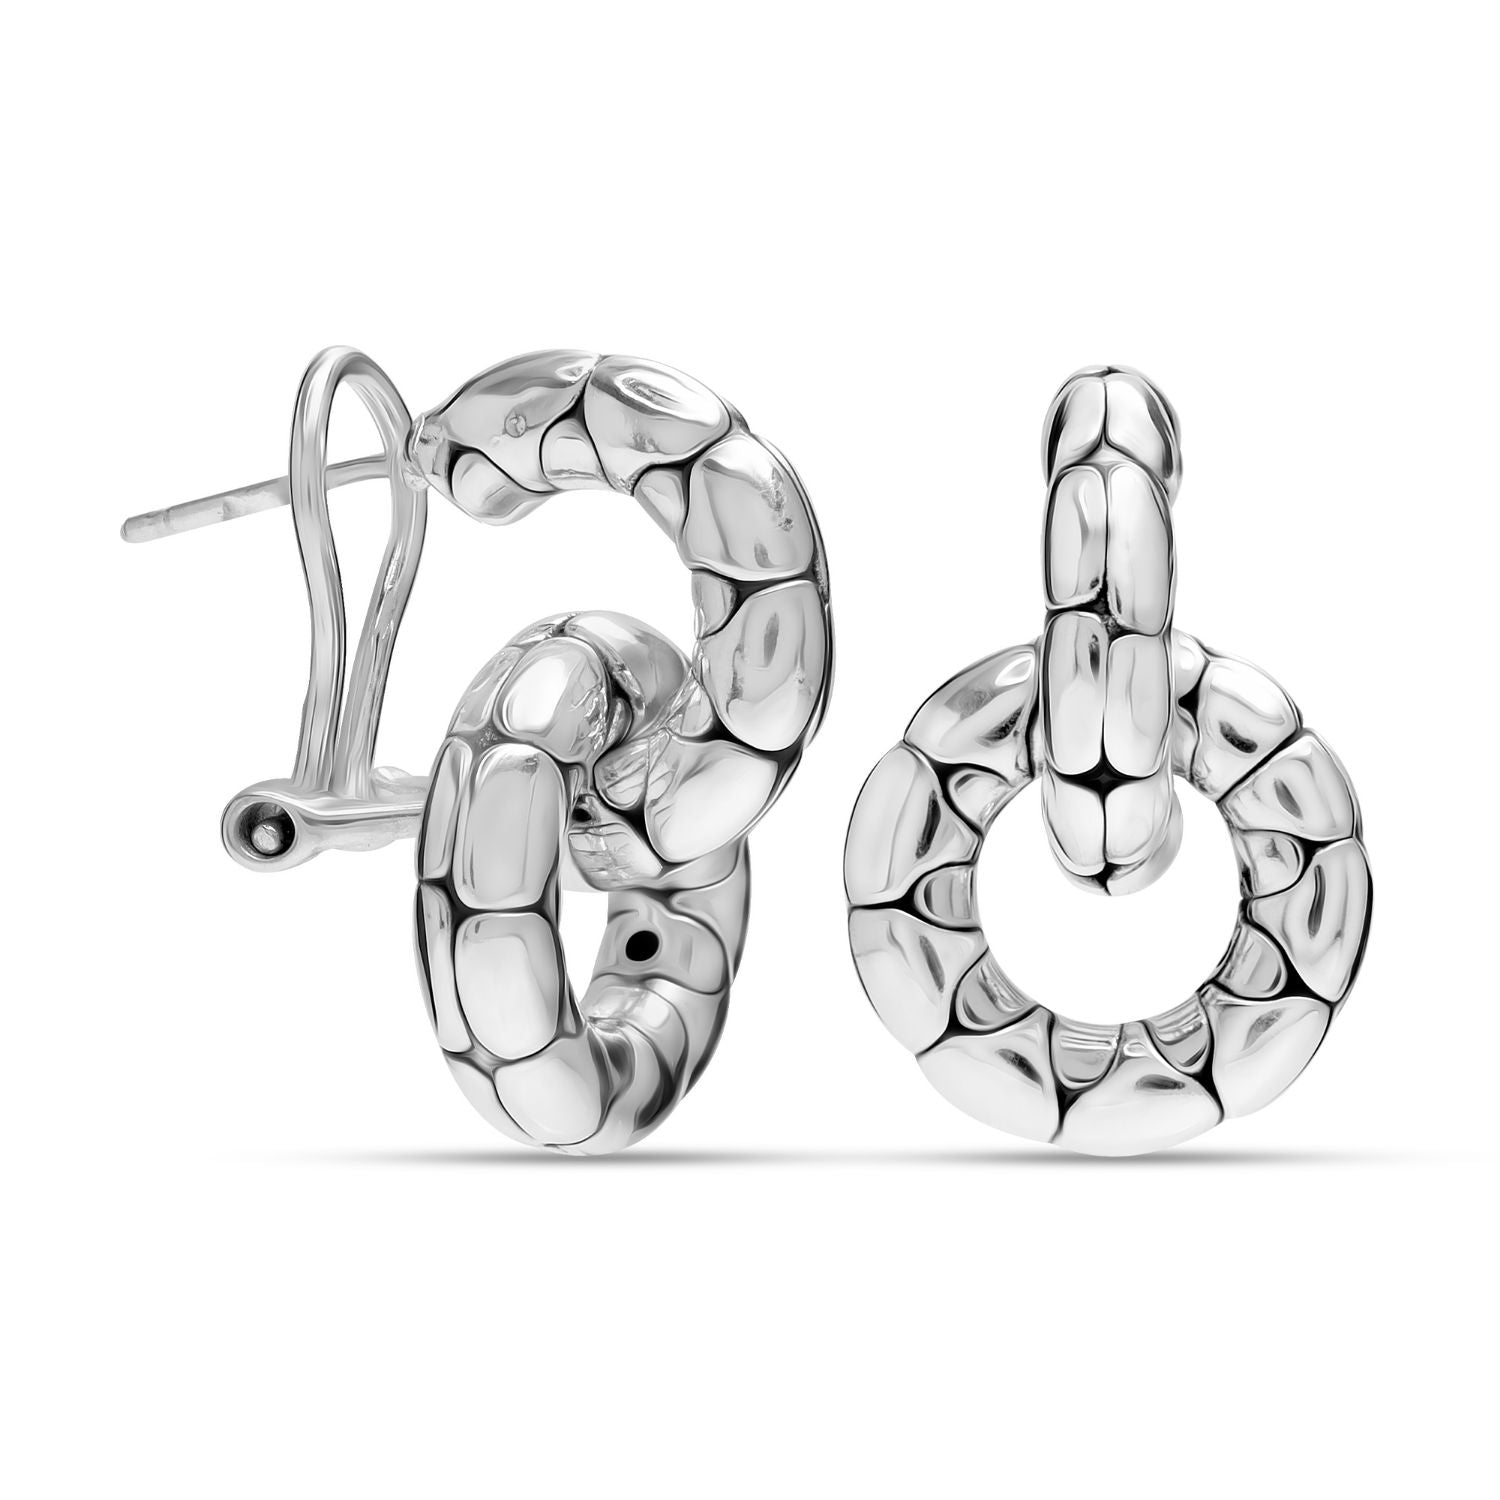 925 Sterling Silver Antique Detachable Door Knocker with Omega Clip-On Closure Double Hoop Earrings for Women